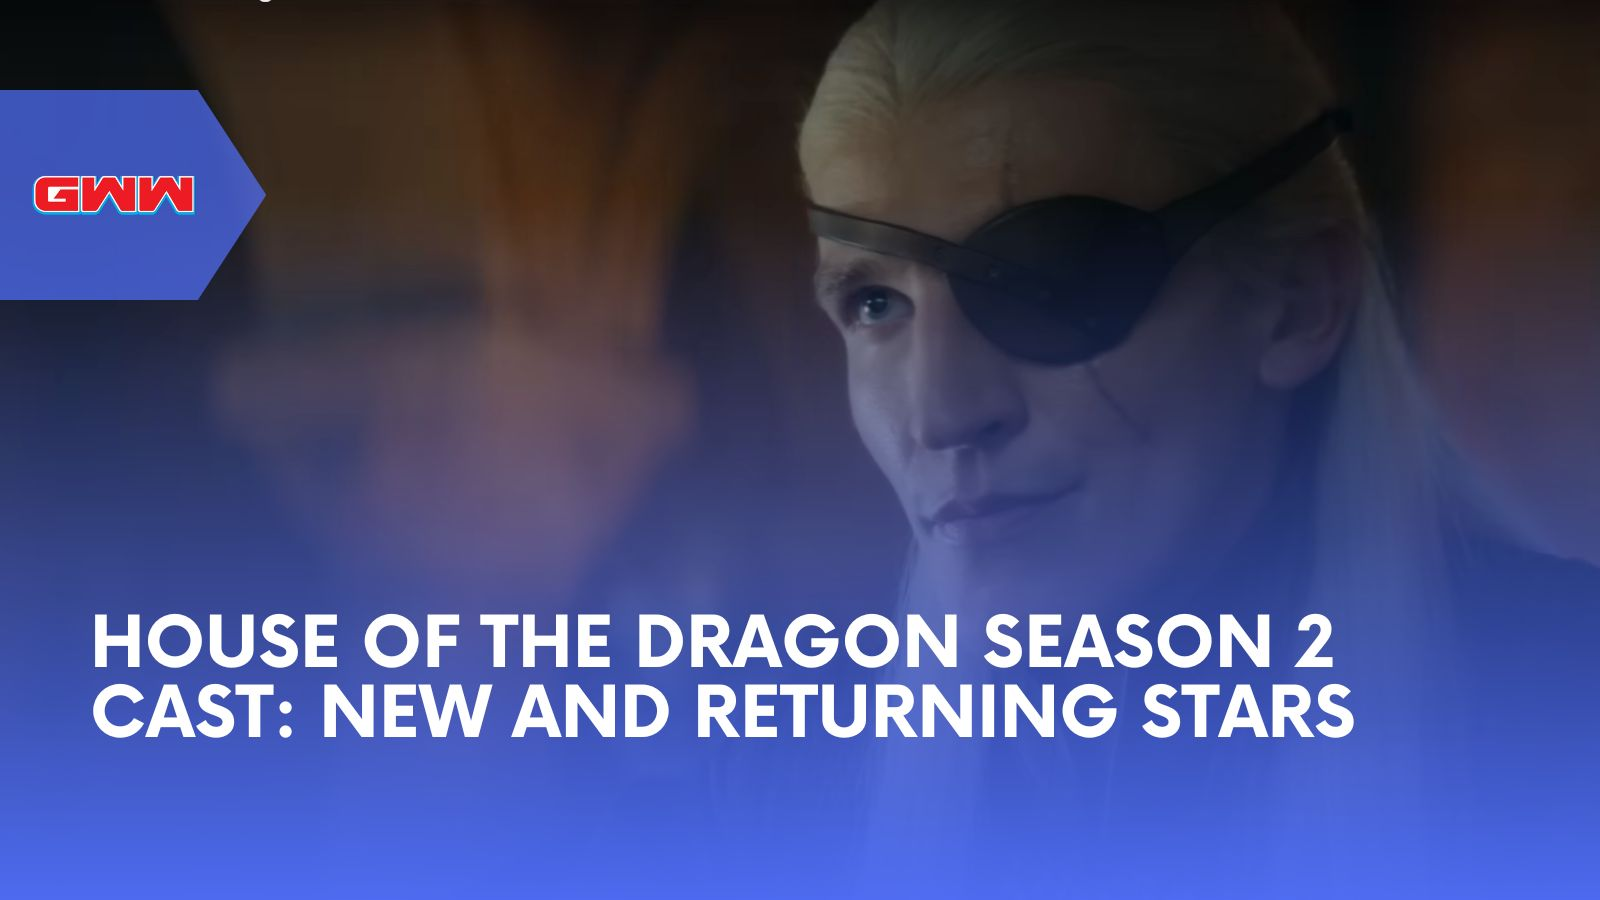 House of the Dragon Season 2 Cast: New and Returning Stars